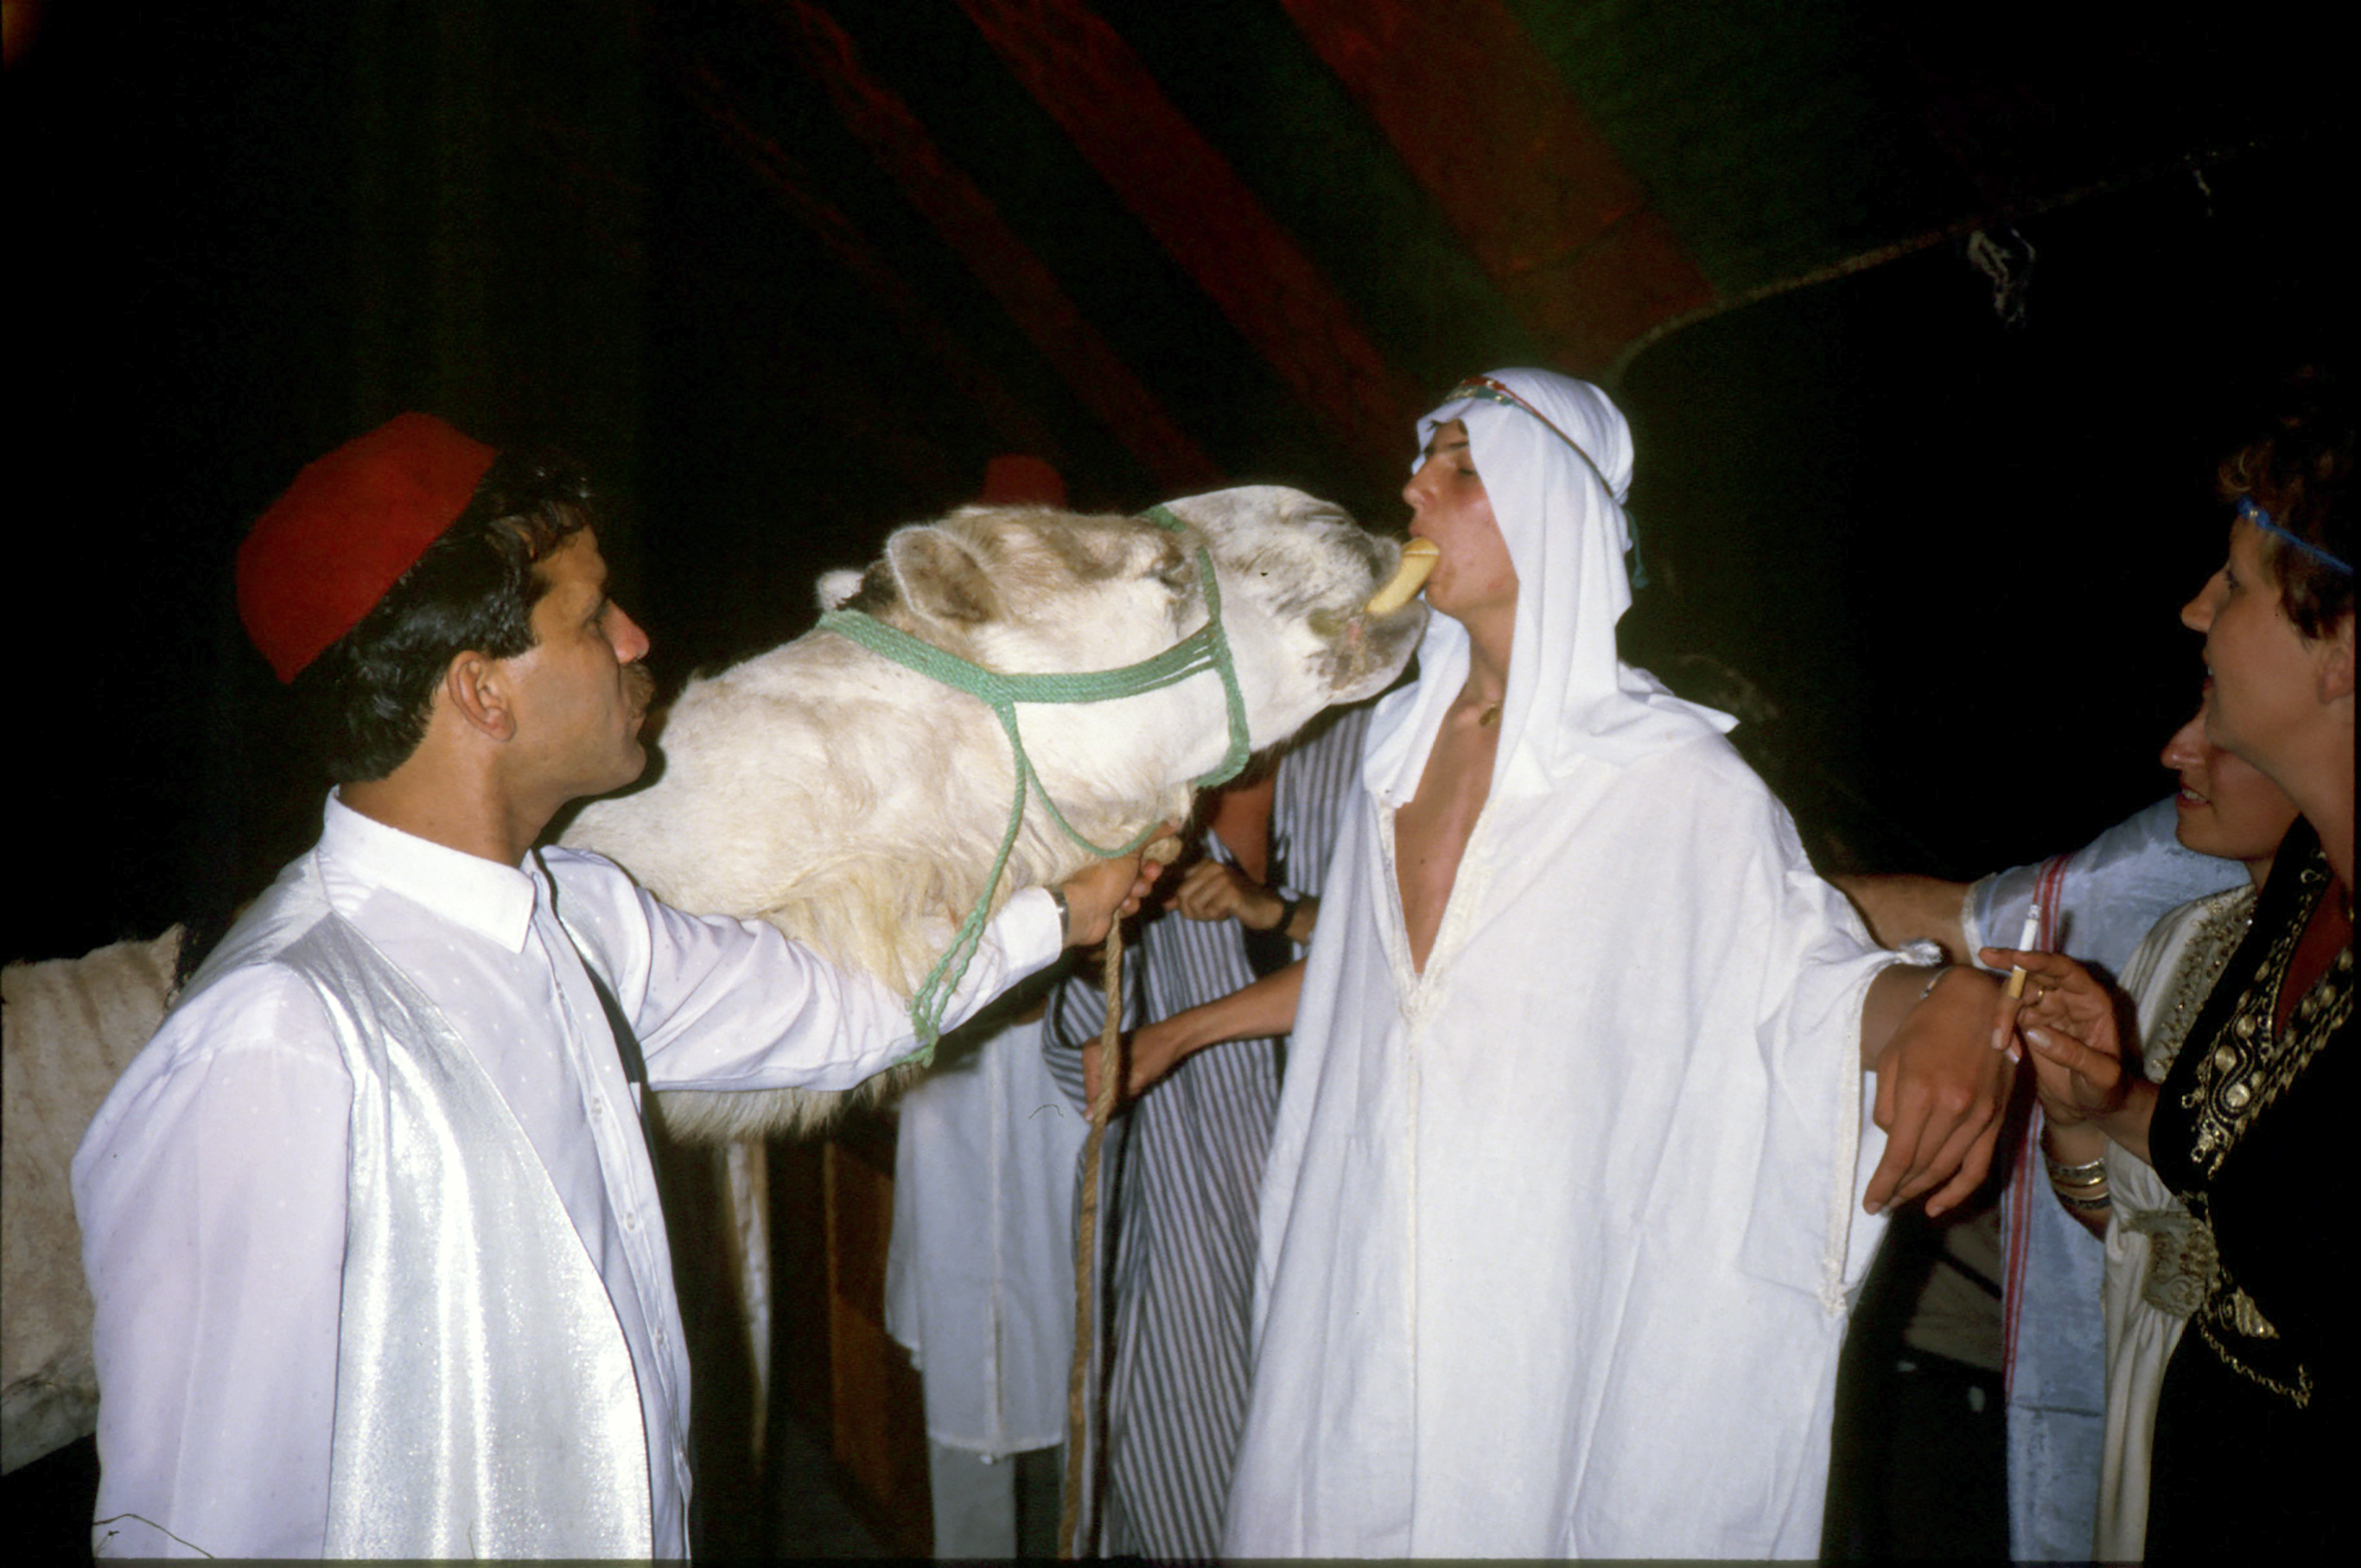 How to give a sandwich to a camel...